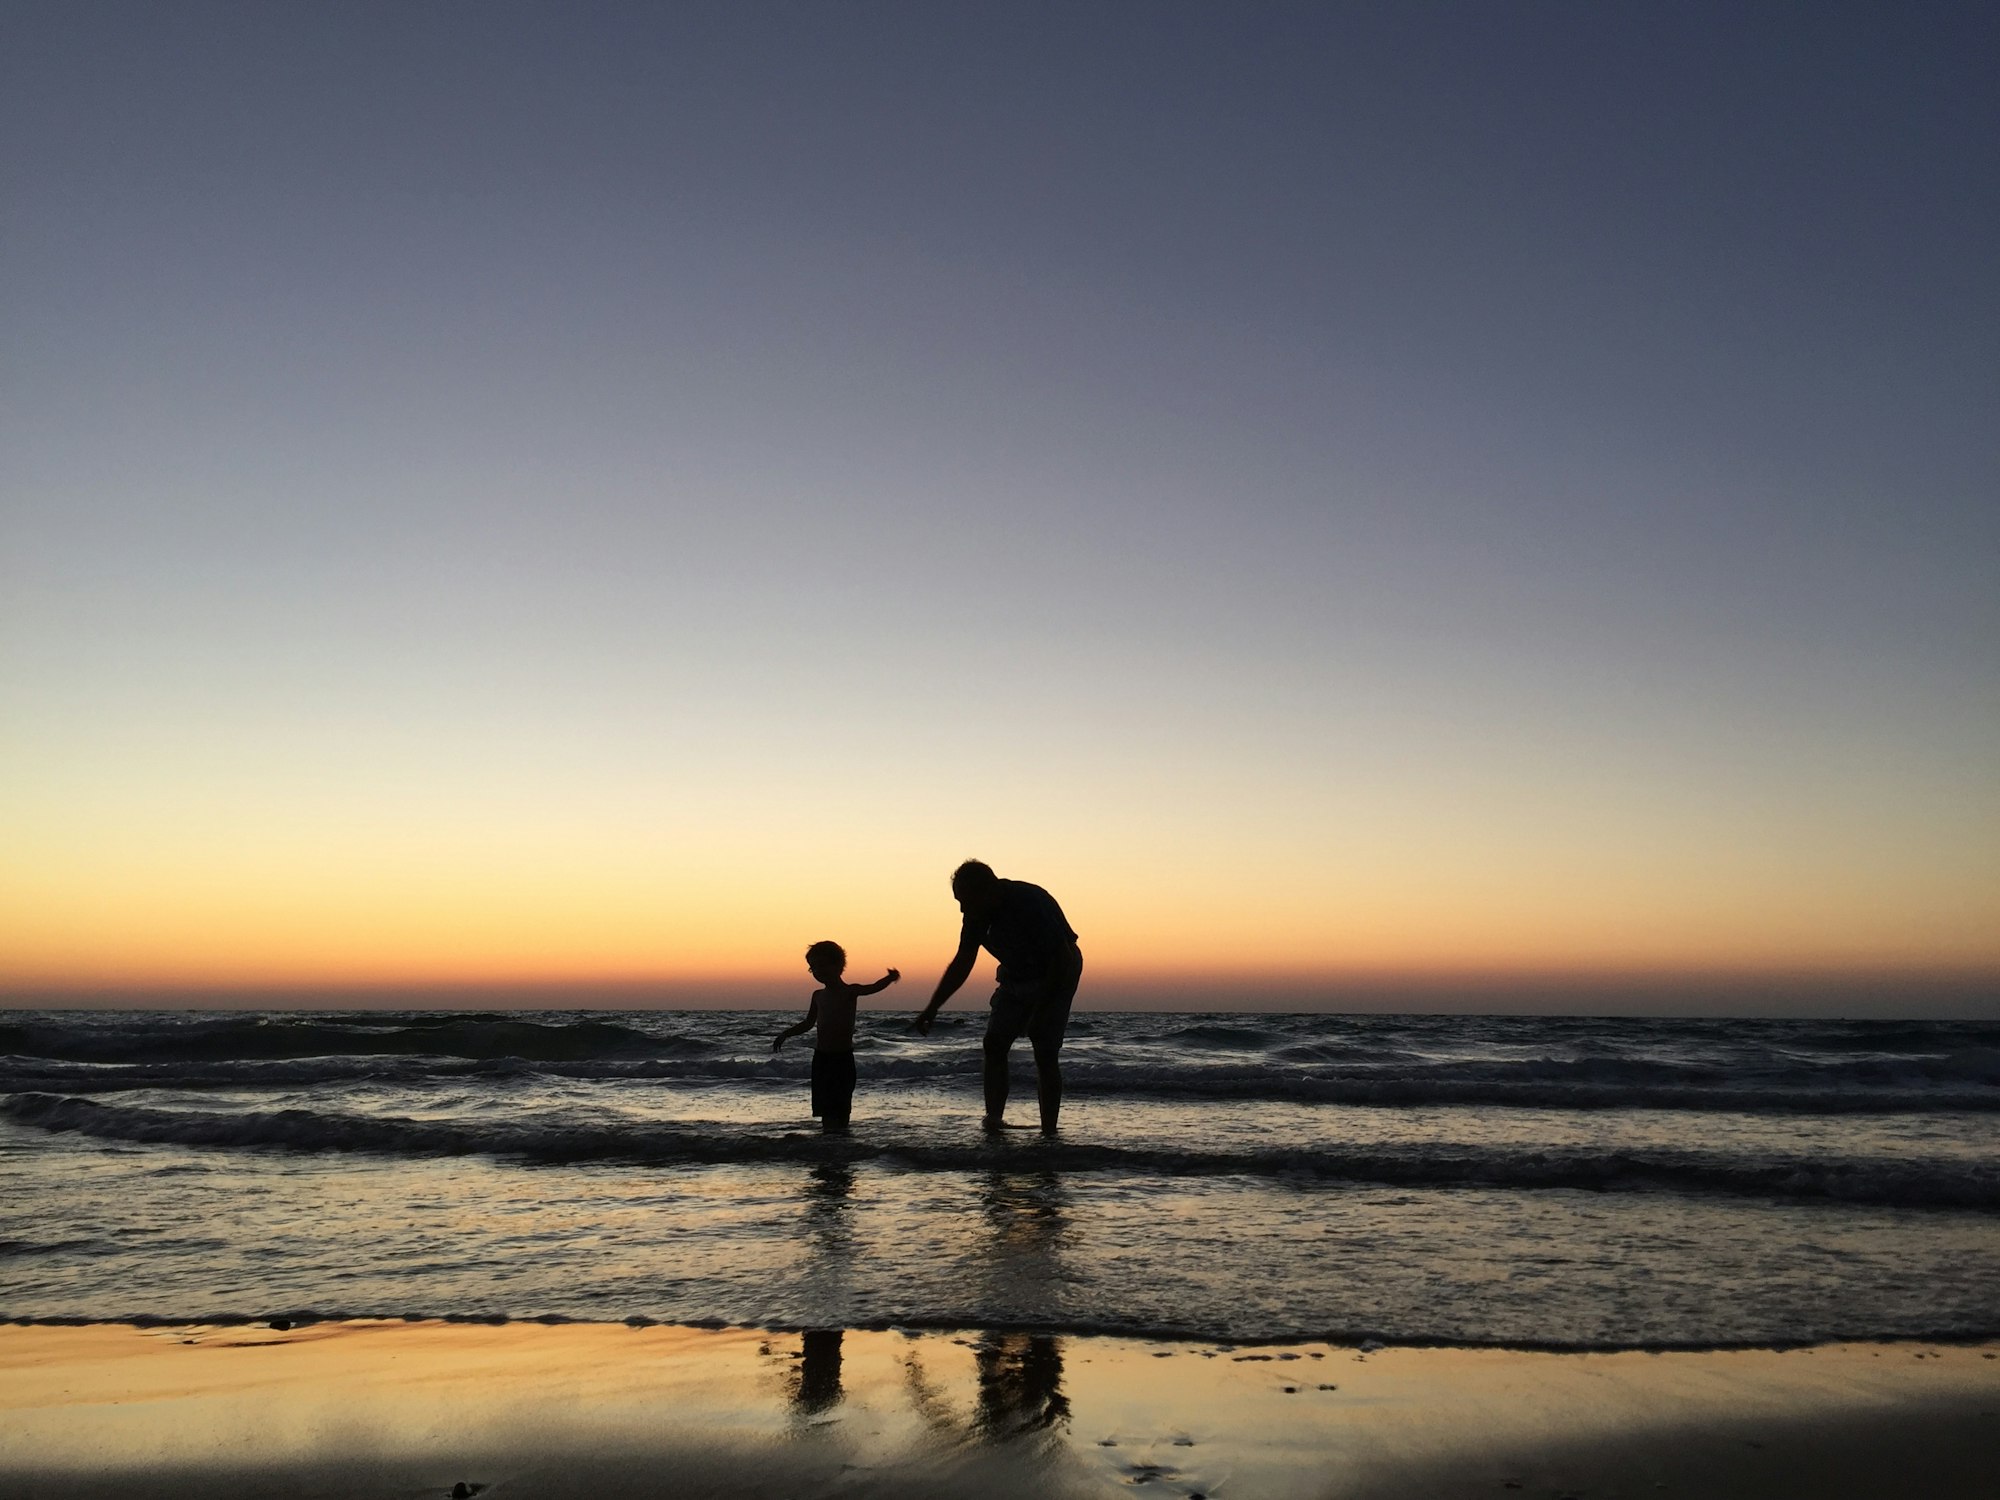 My 3-year-old was having fun in the water with his grand-daddy. It was on the seashore of Haifa in Israel (Dado beach). The sun was setting, and a magical moment appeared.